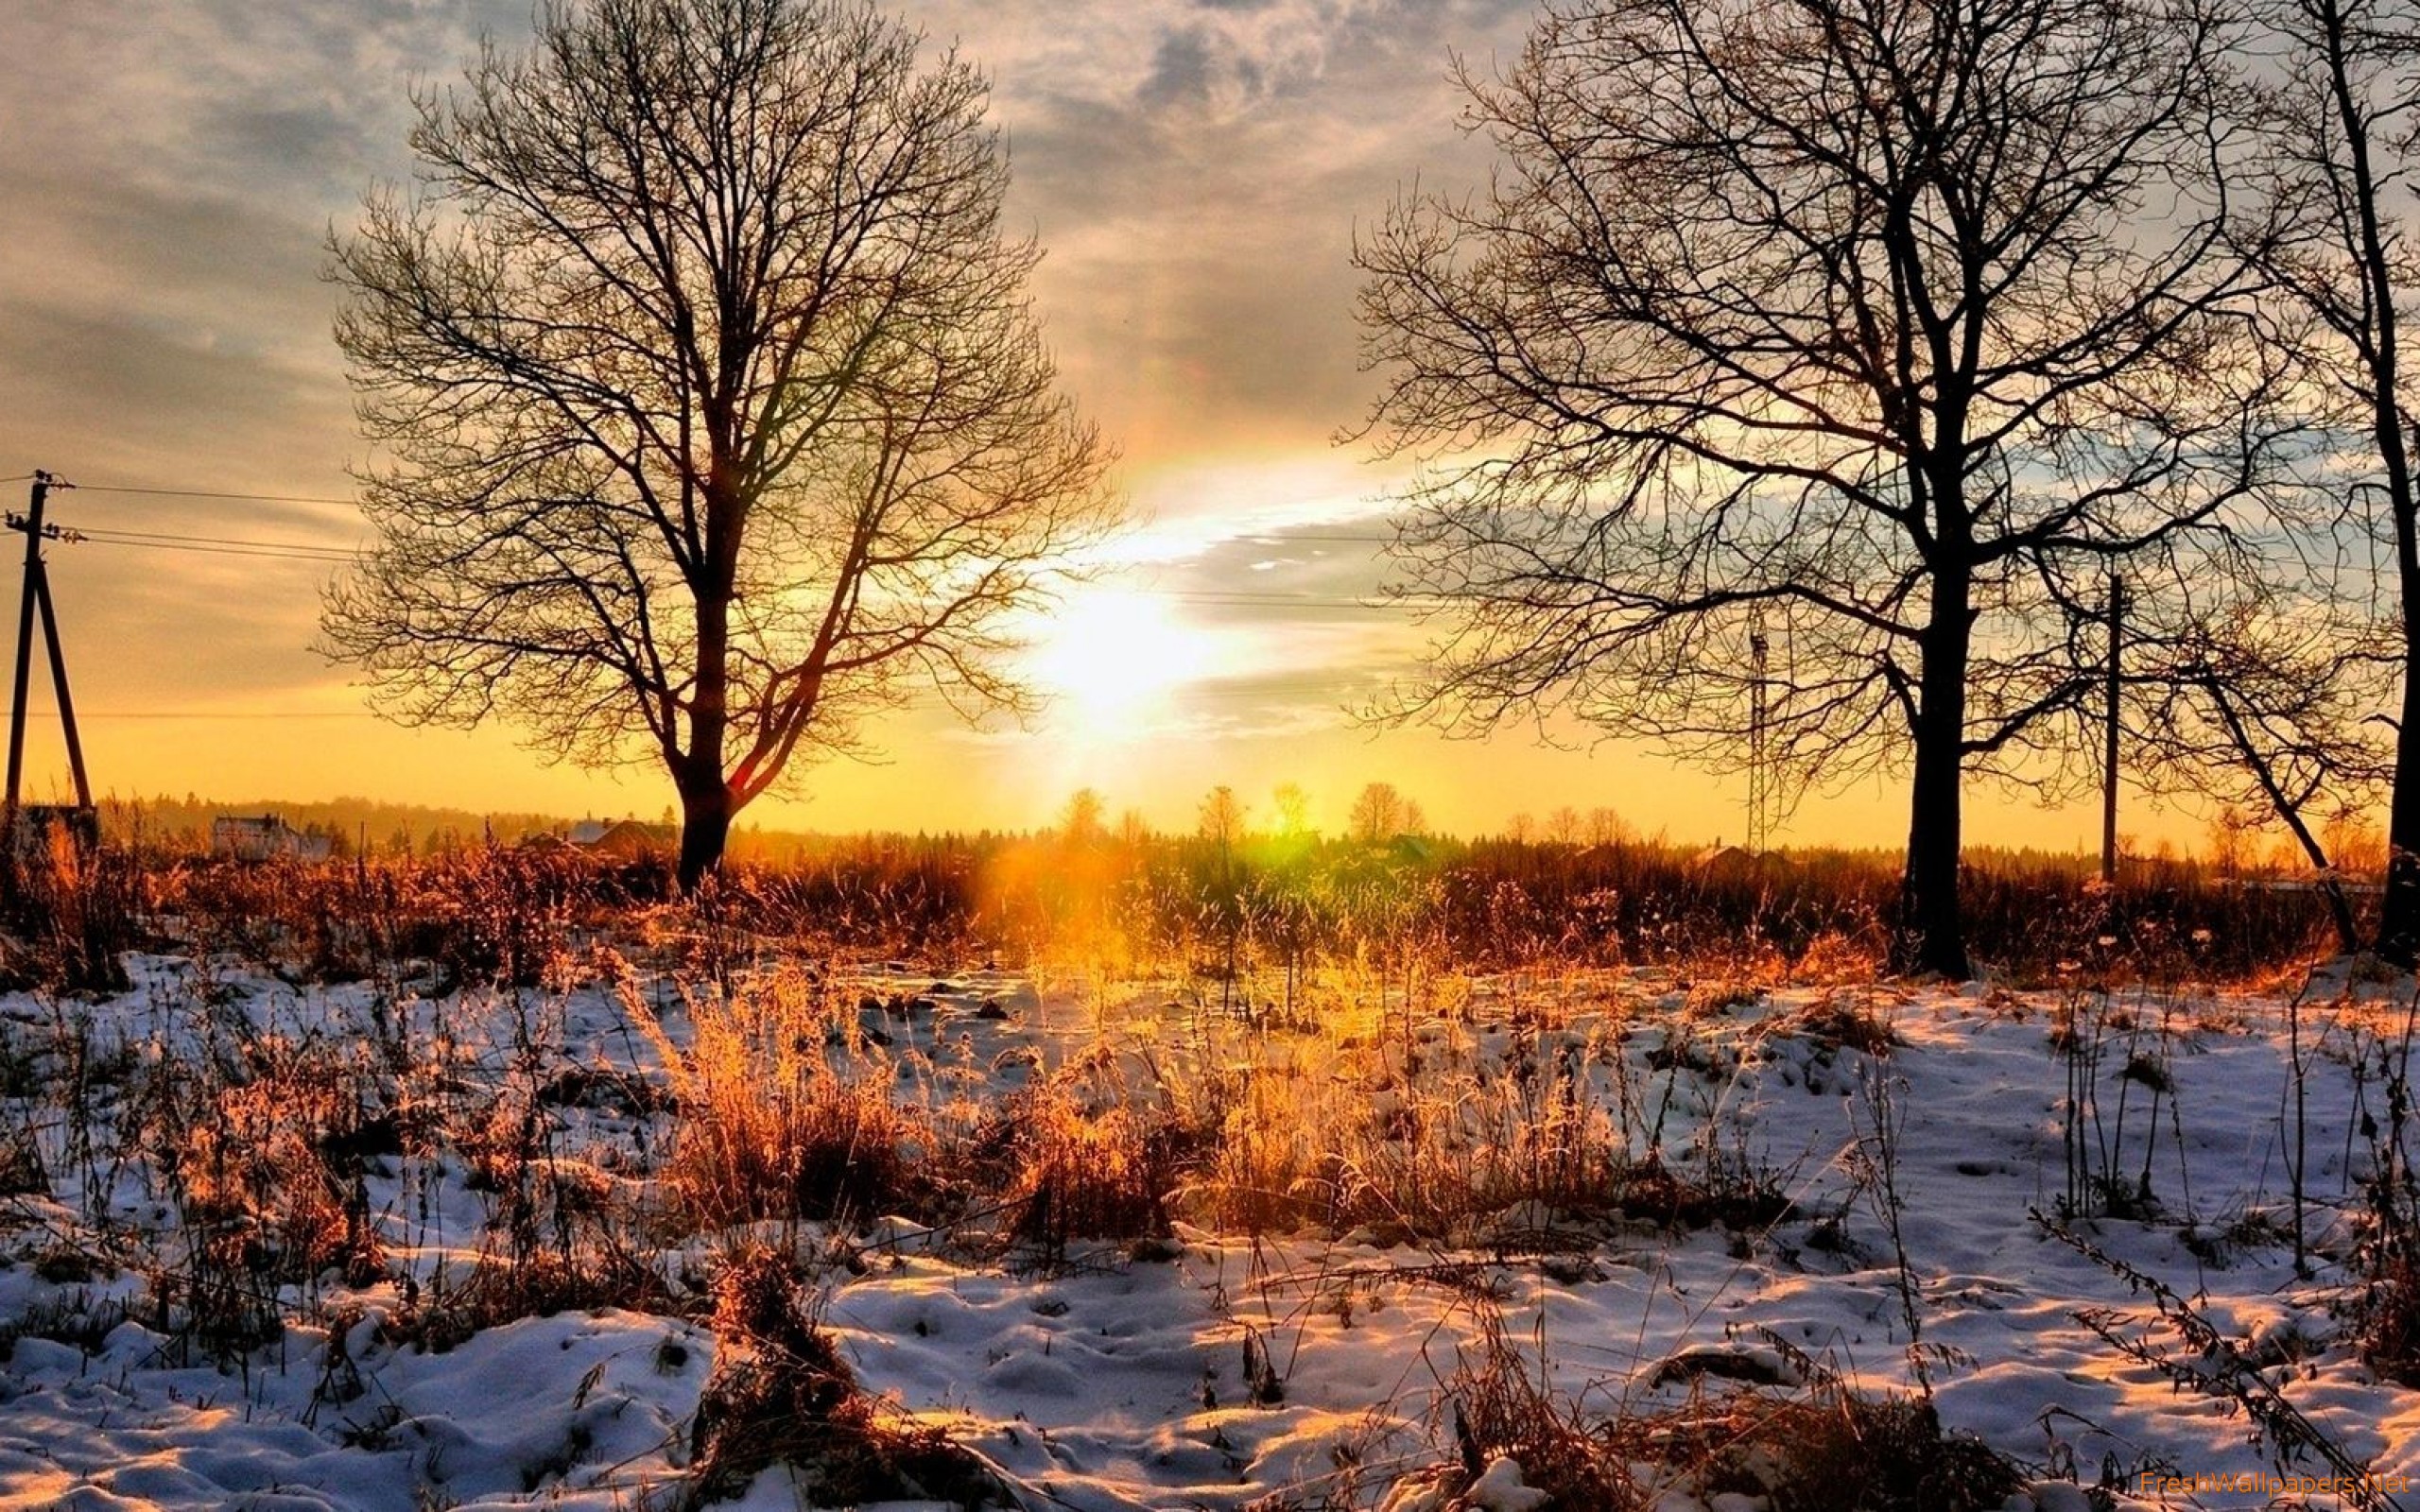 Golden Sunset Sky Above The Snowy Nature Wallpaper - Red Sky At Morning , HD Wallpaper & Backgrounds